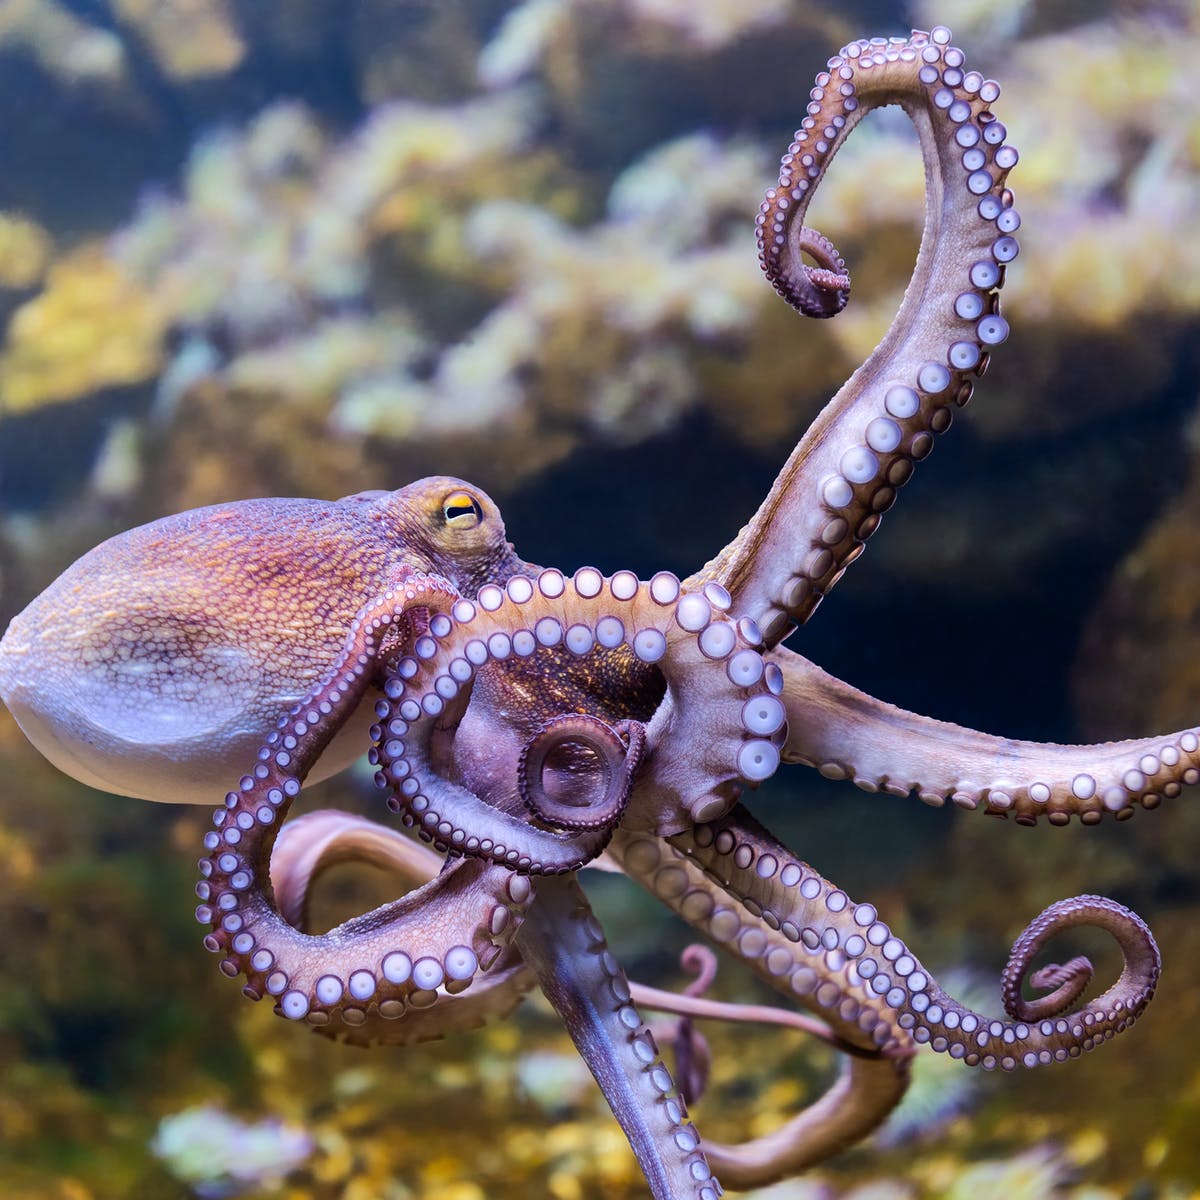 Octopus facts 